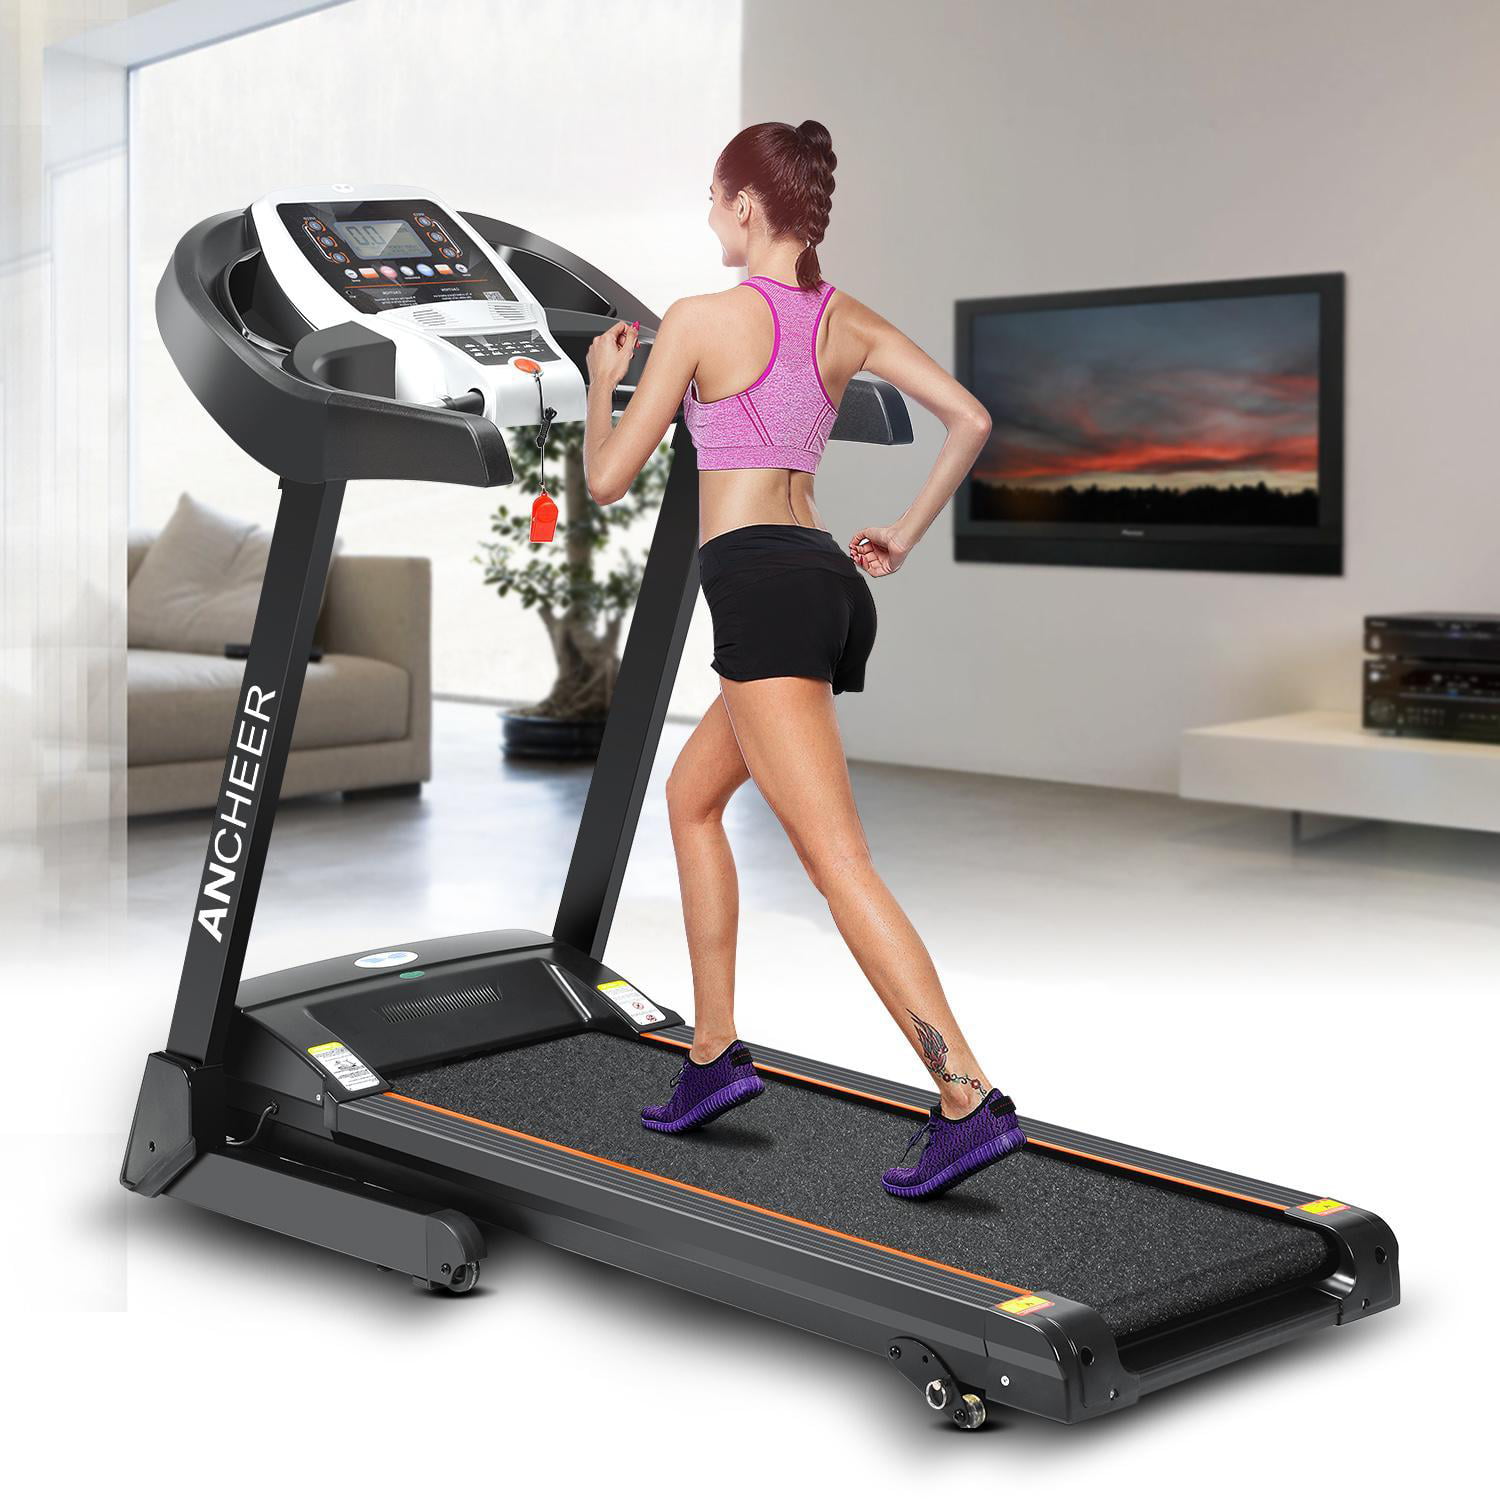 Details about   ANCHEER Electric Treadmills Folding Home Walking Running Machine W LCD B t e 37 